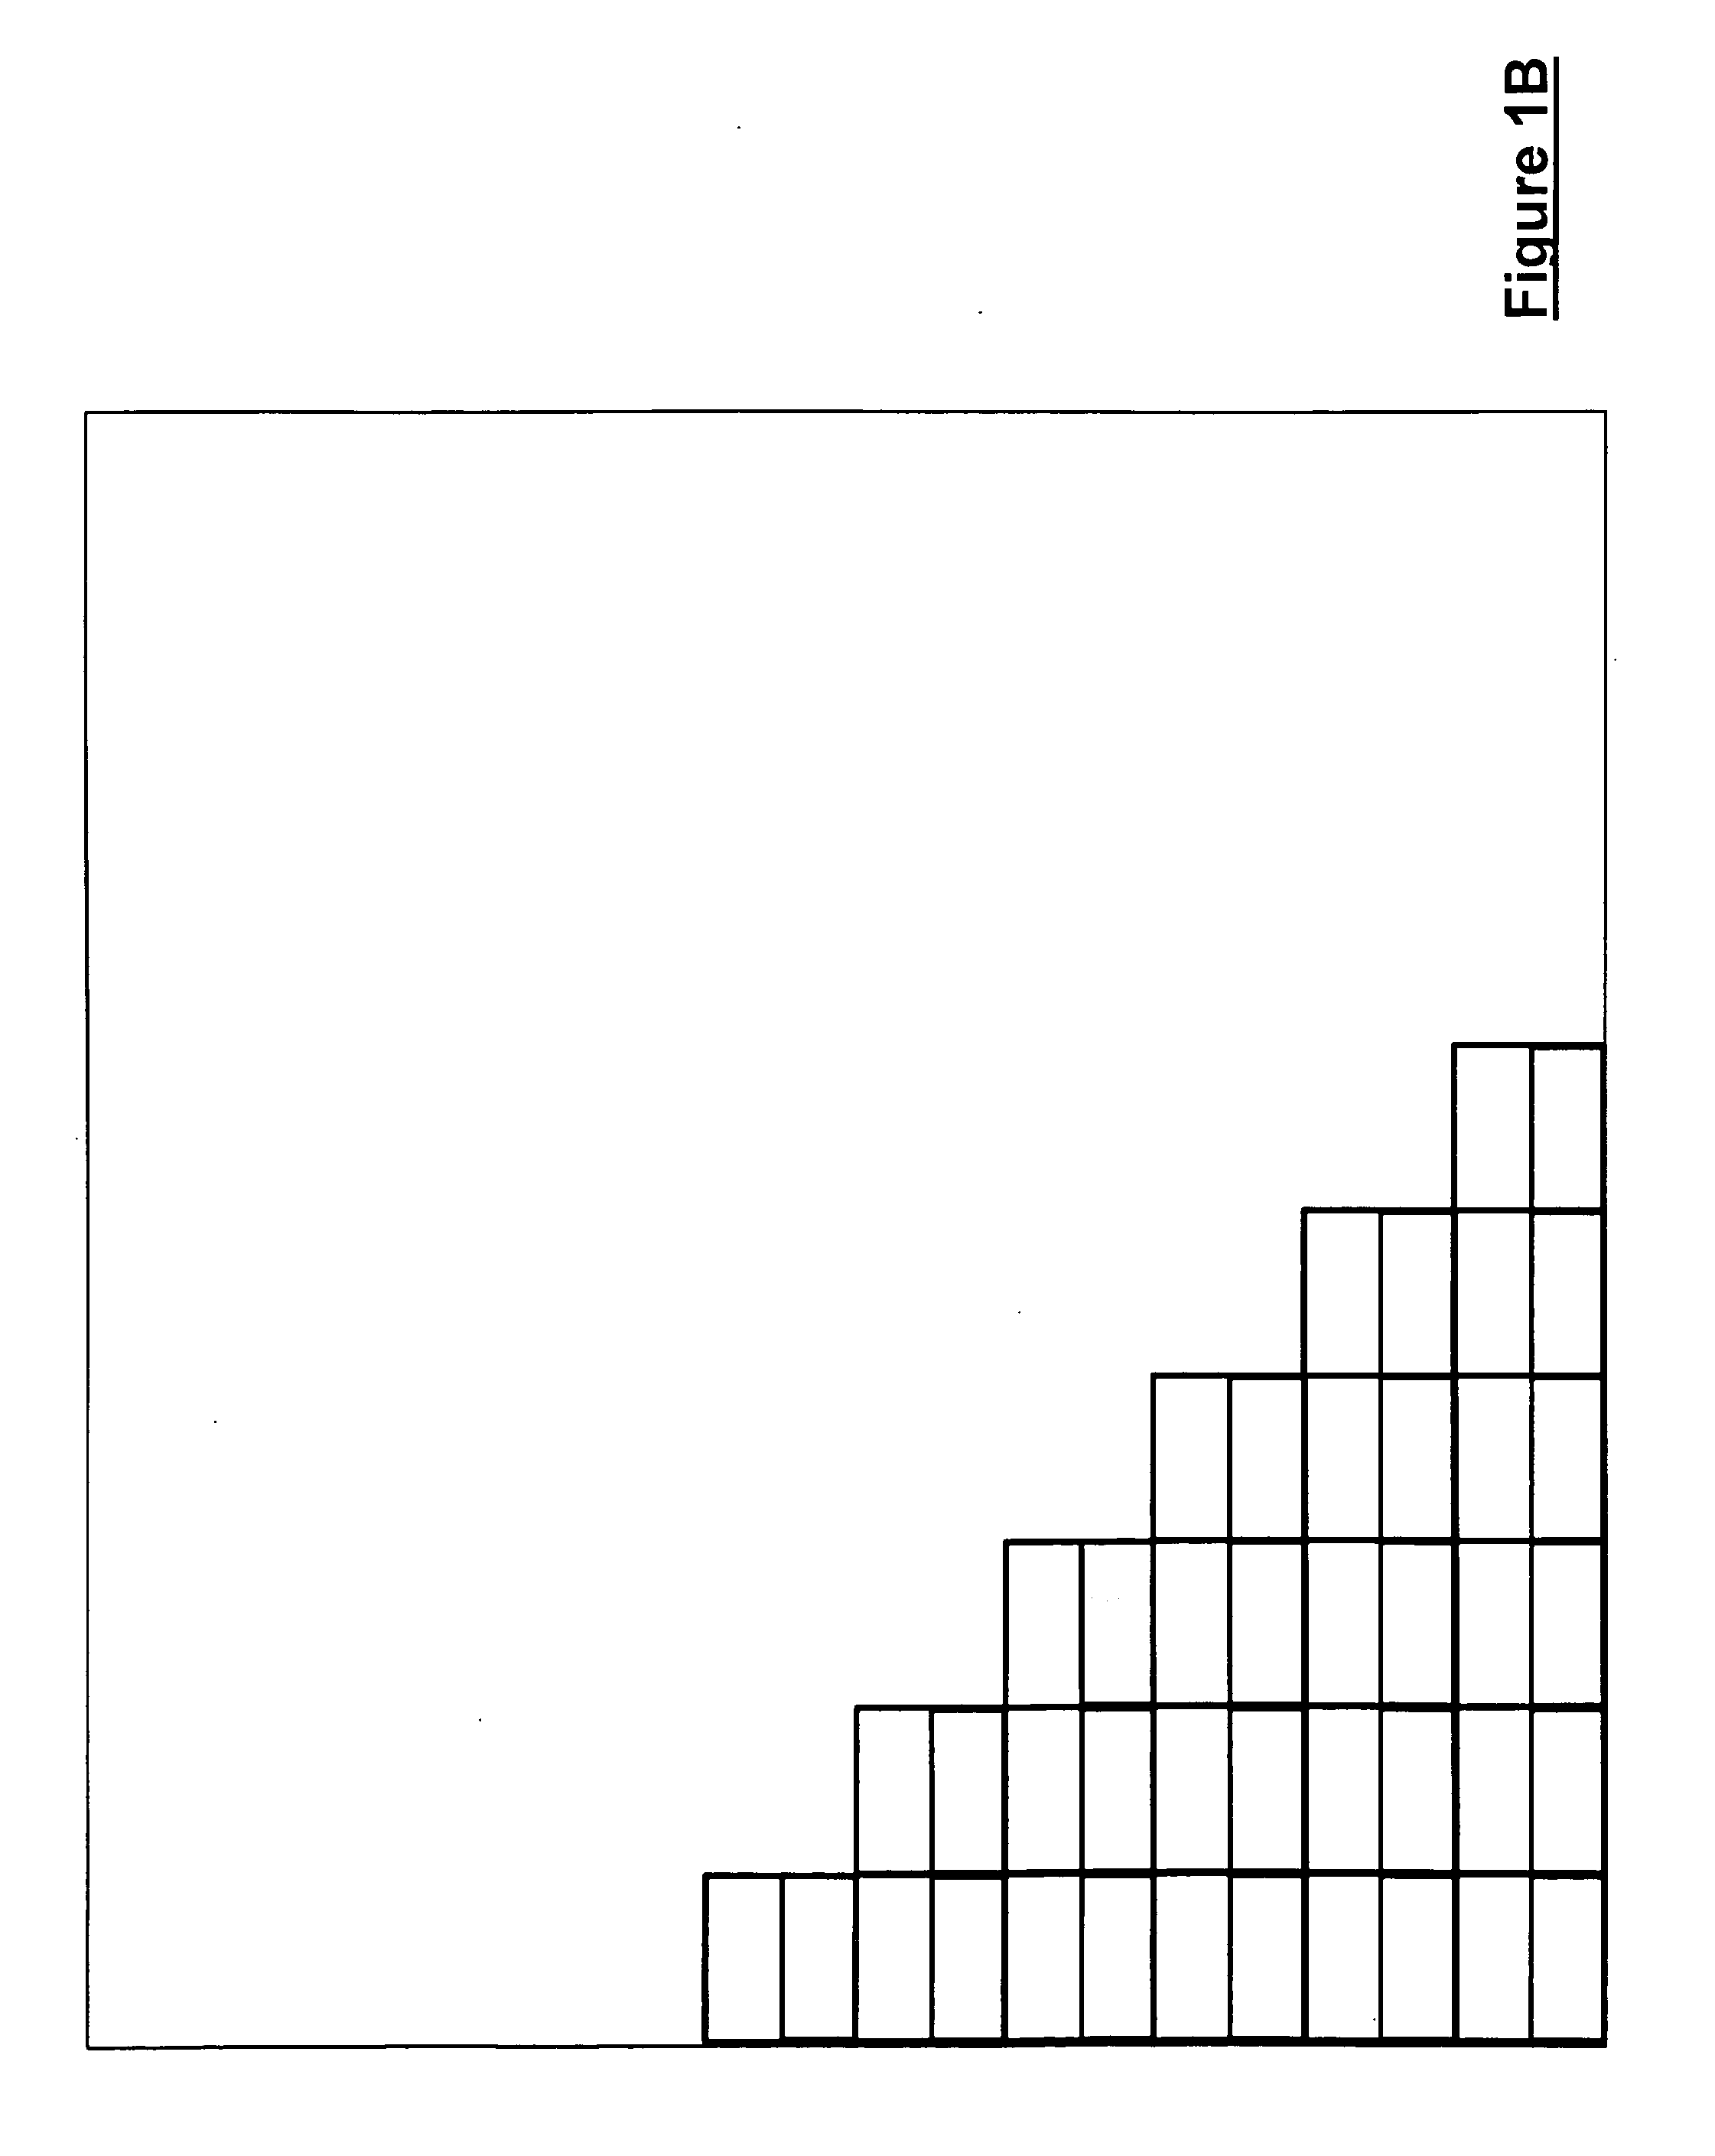 Wireless solar shingle panel and a method for implementing same